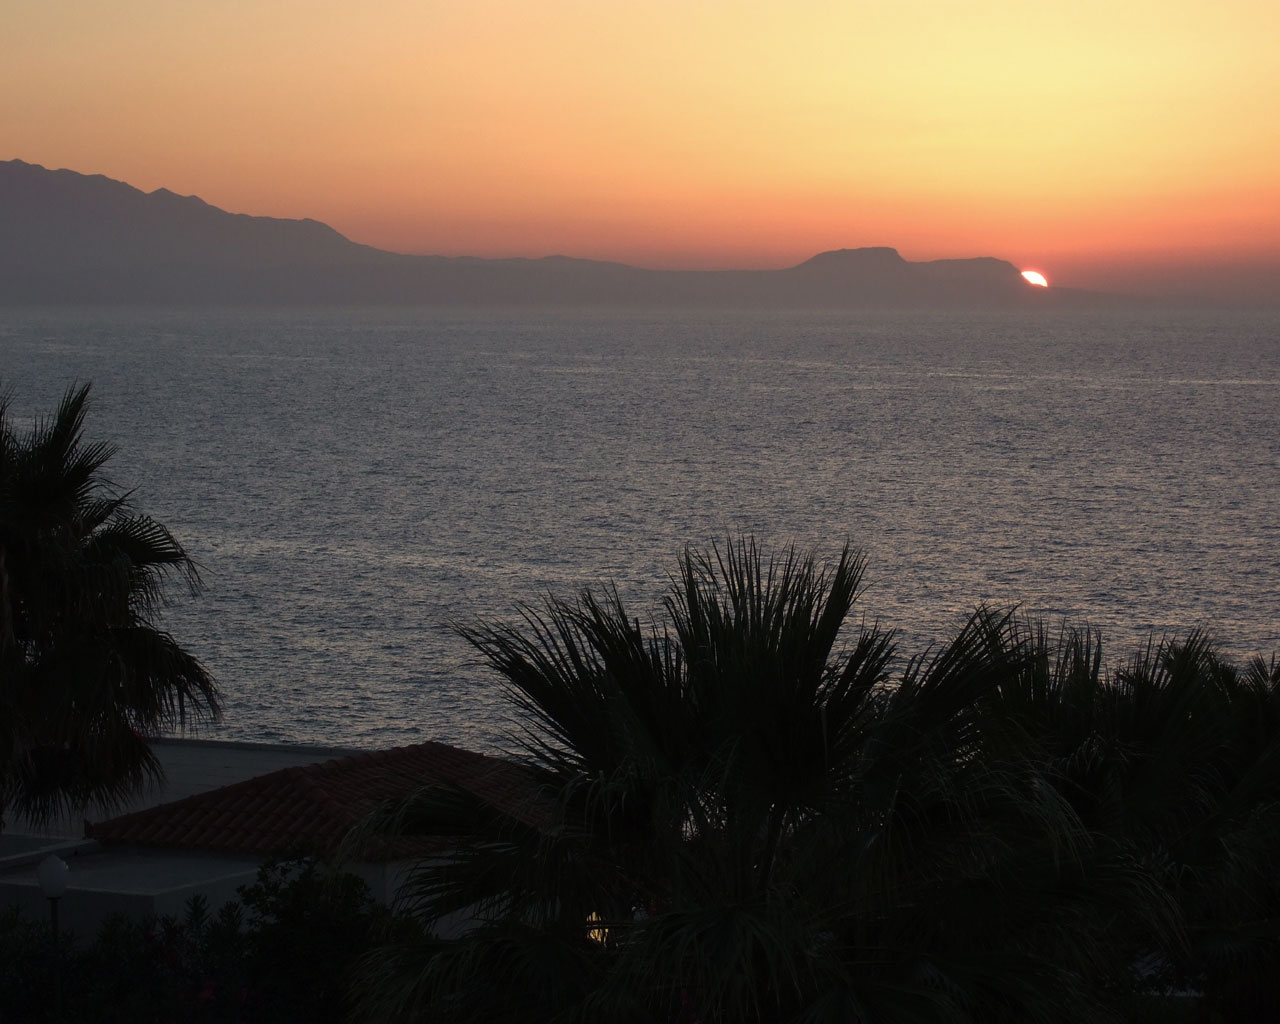 Sun nearly set behind the mountain
      in the sea.